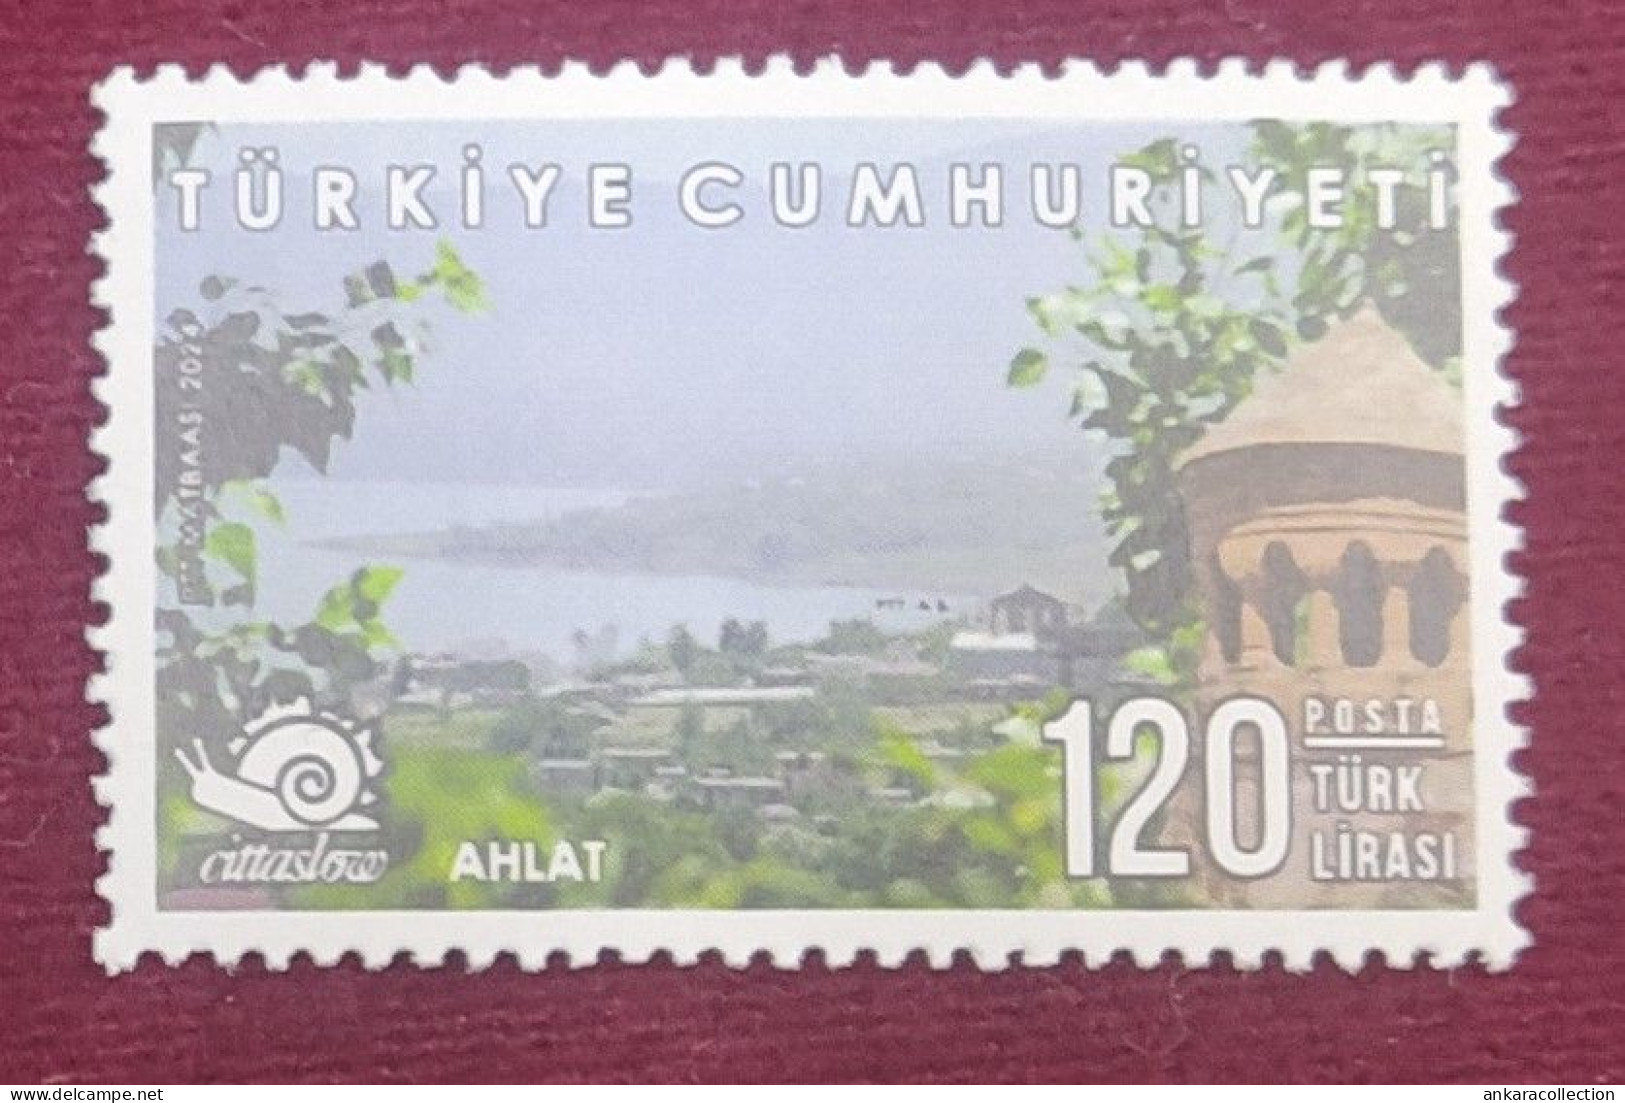 AC - TURKEY STAMP  THE  DEFINITIVE POSTAGE STAMP WITH THE THEME OF CITTASLOW-4 MNH  22 MARCH 2024 - Ongebruikt